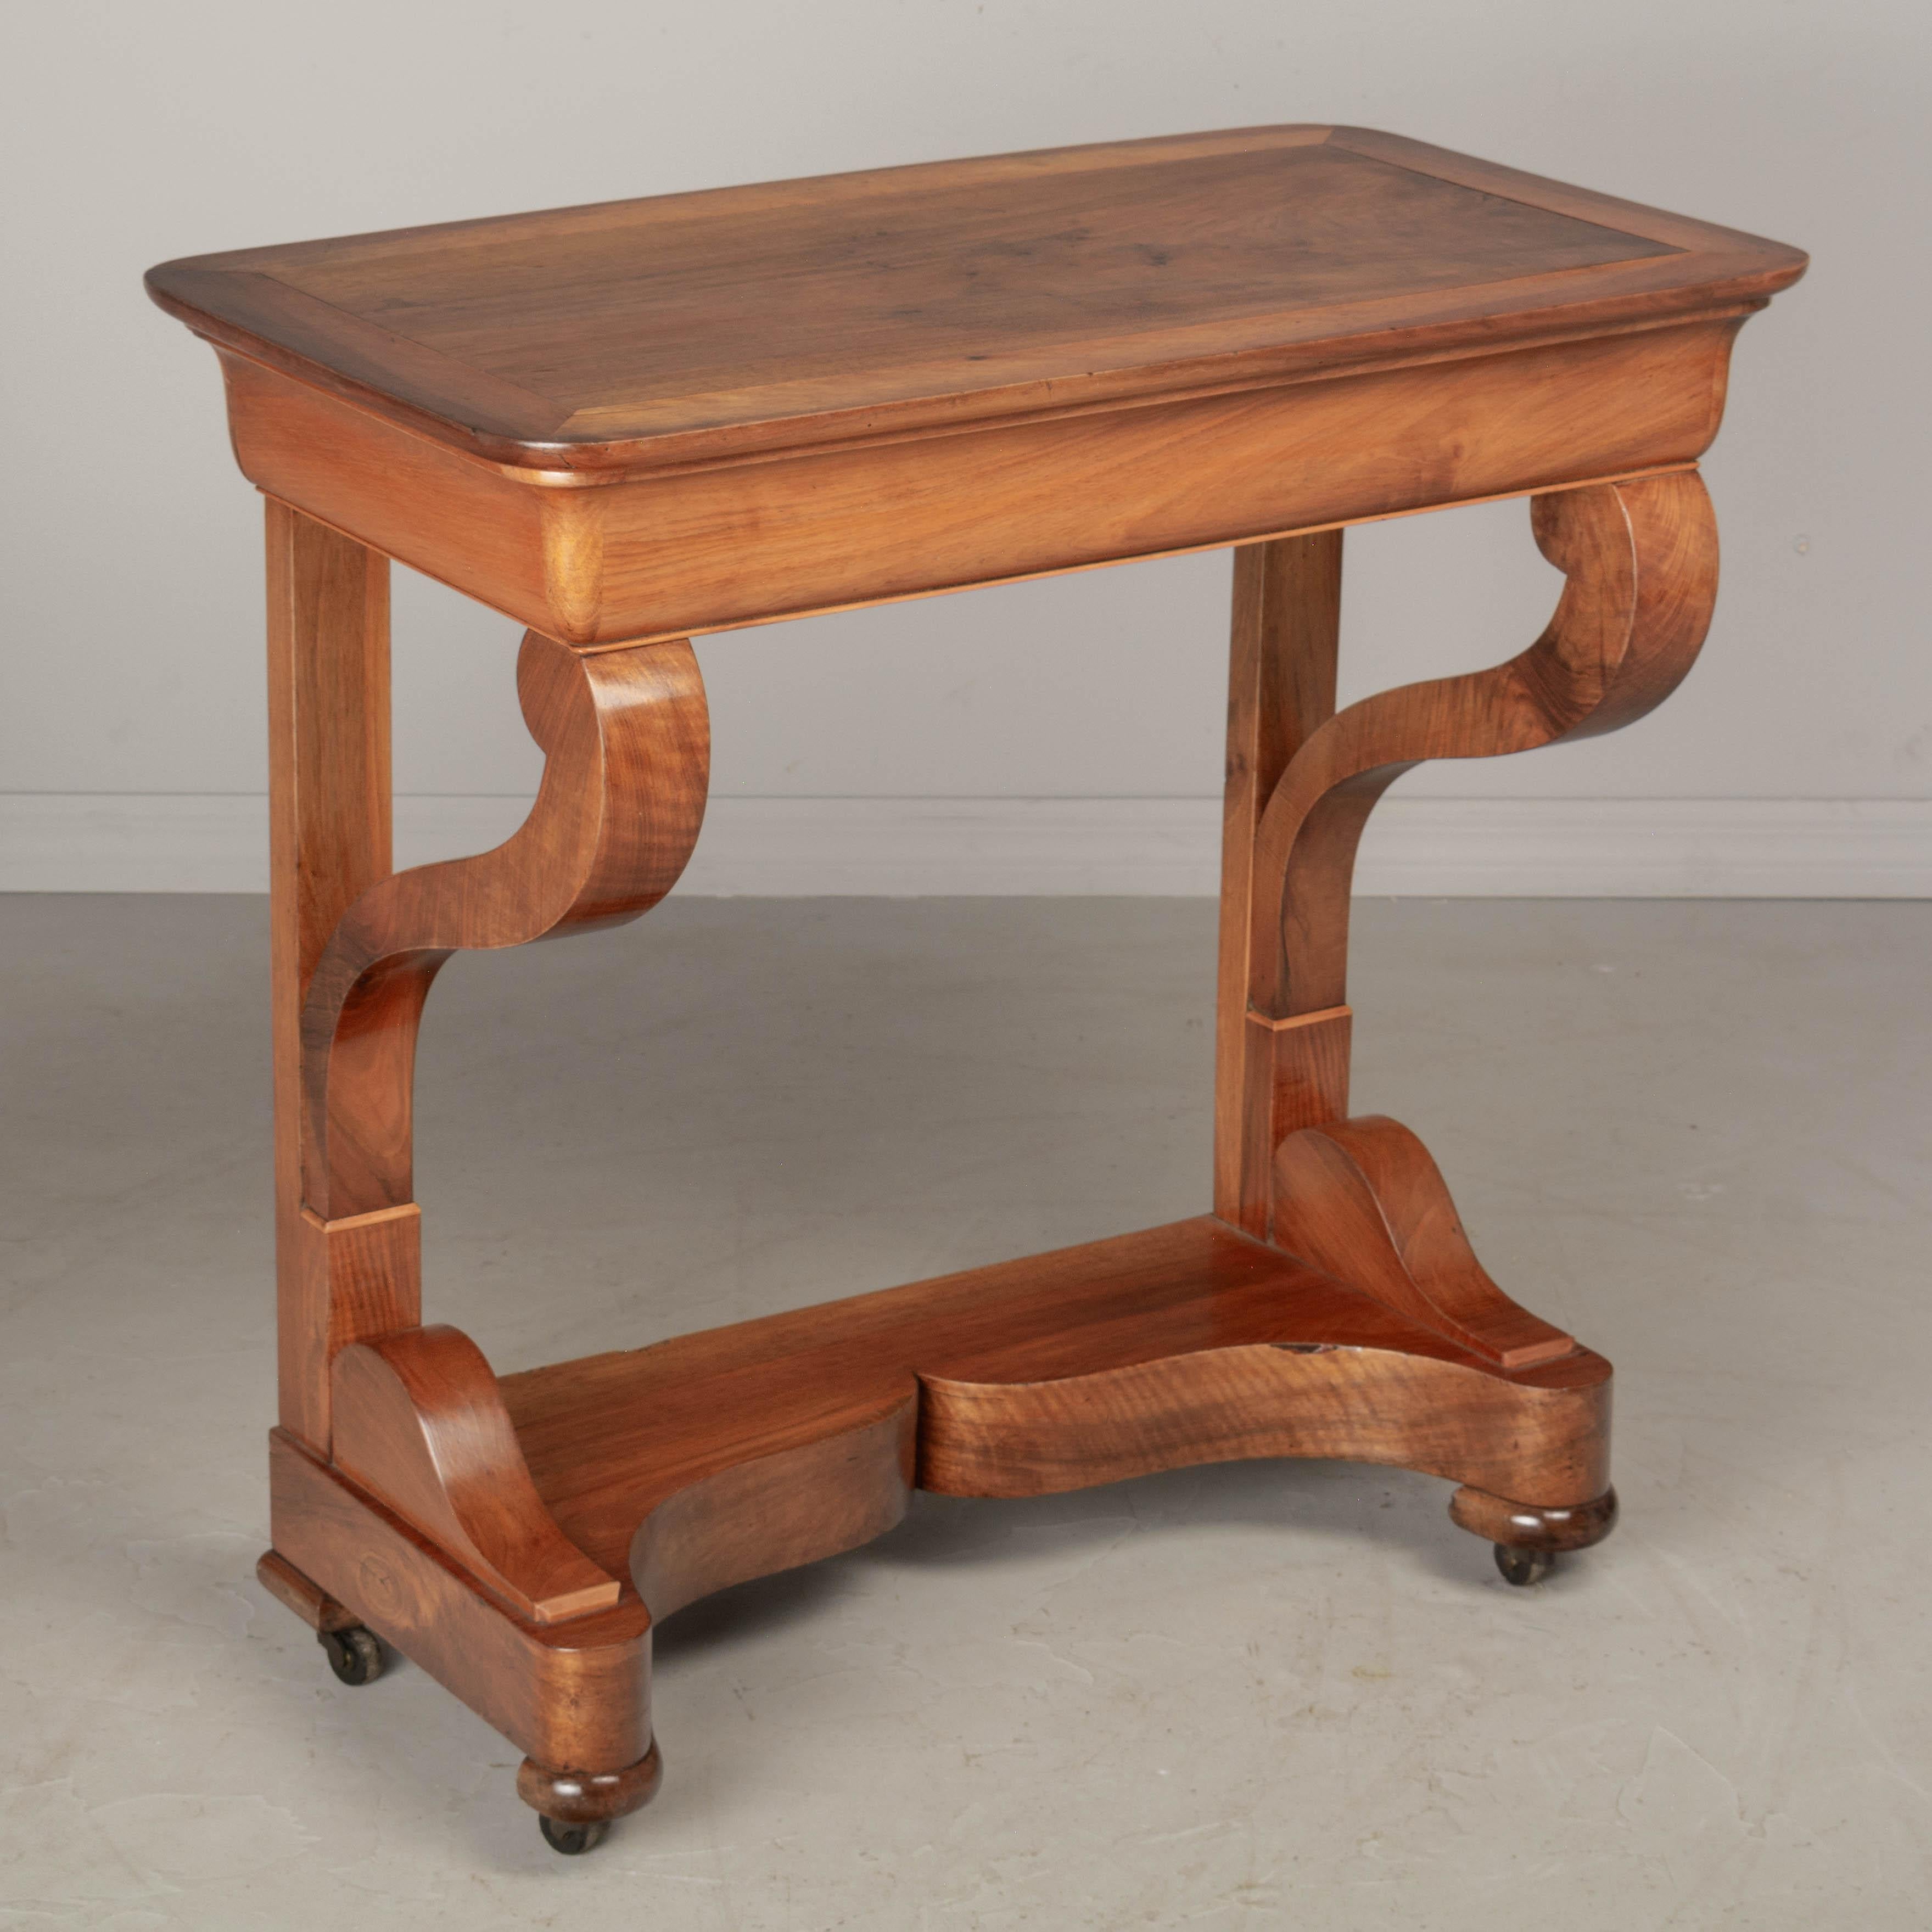 A 19th century French Louis-Philippe console made of solid walnut and veneer of walnut. Sculptural scrolled front legs resting on a curved front plinth base with original castors. Hidden dovetailed drawer opens from the backside. Possibly used as a